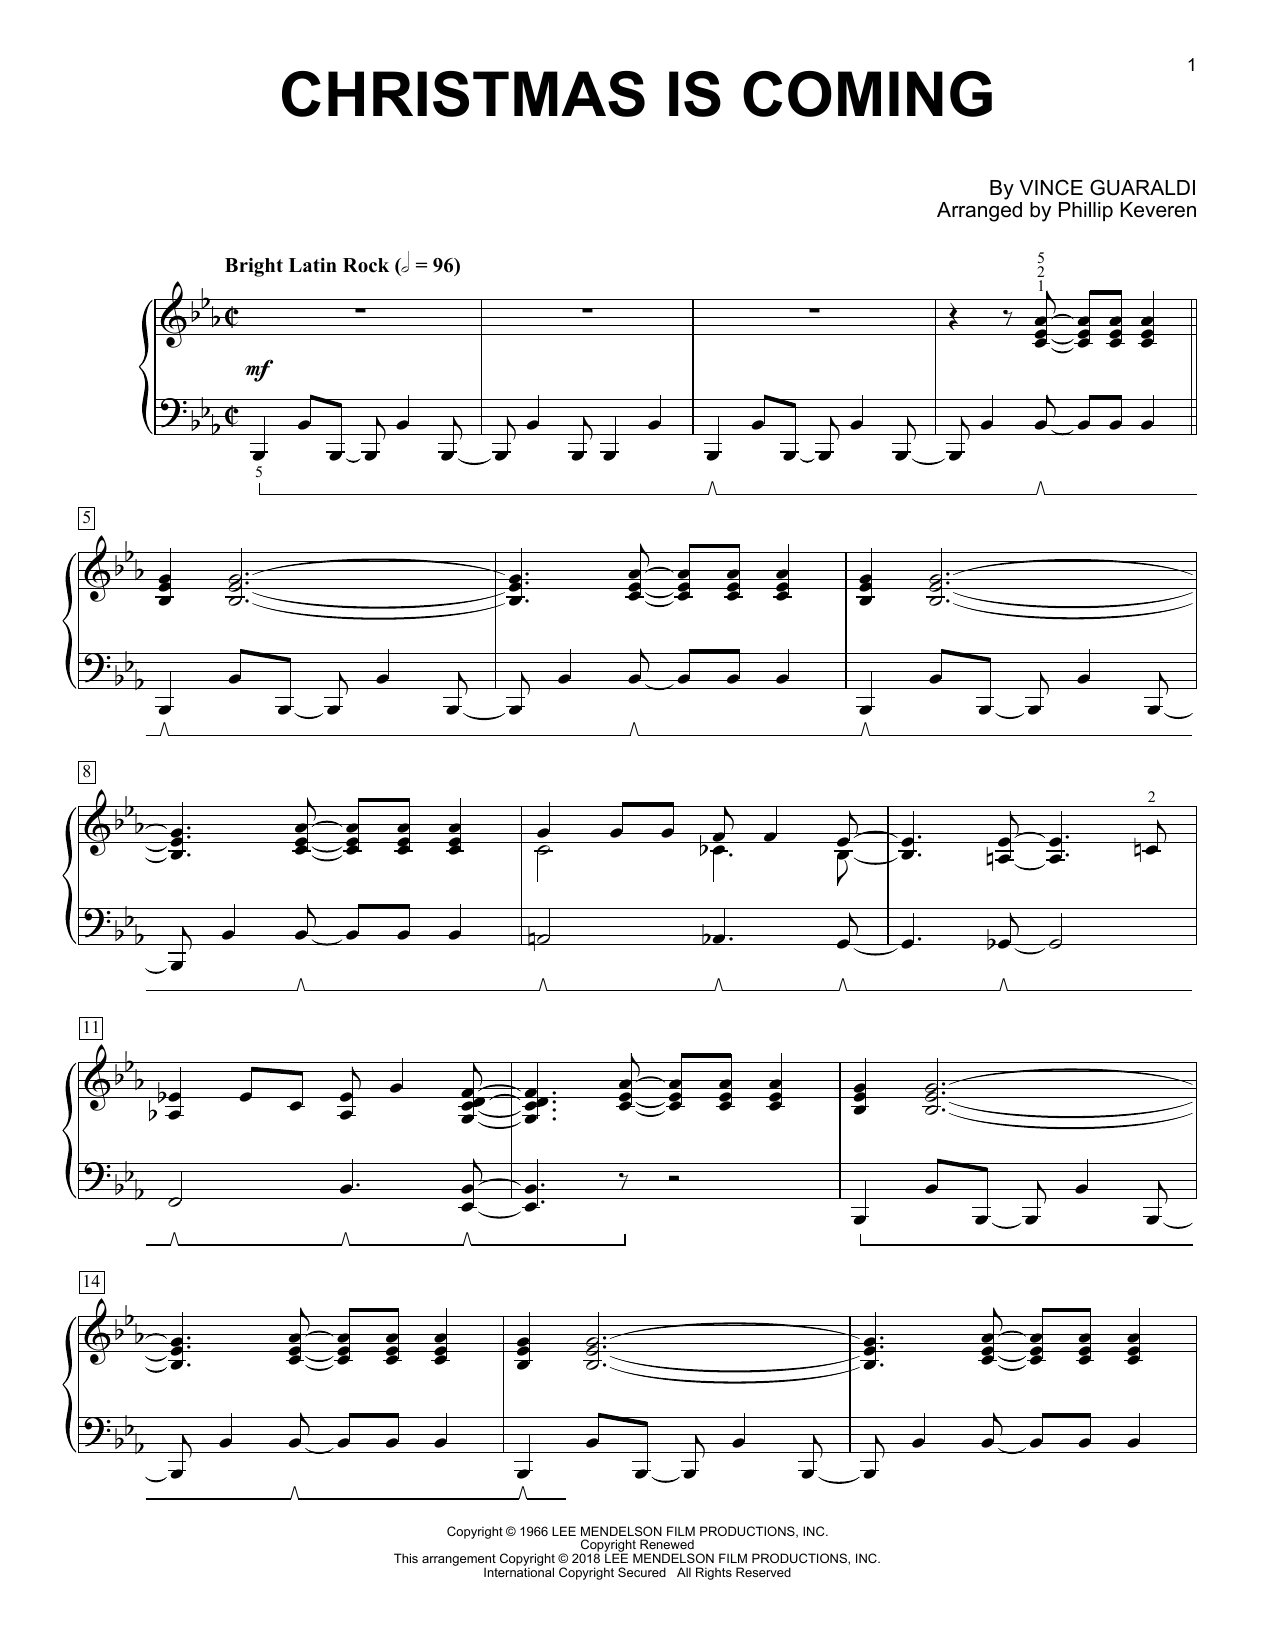 Download Phillip Keveren Christmas Is Coming Sheet Music